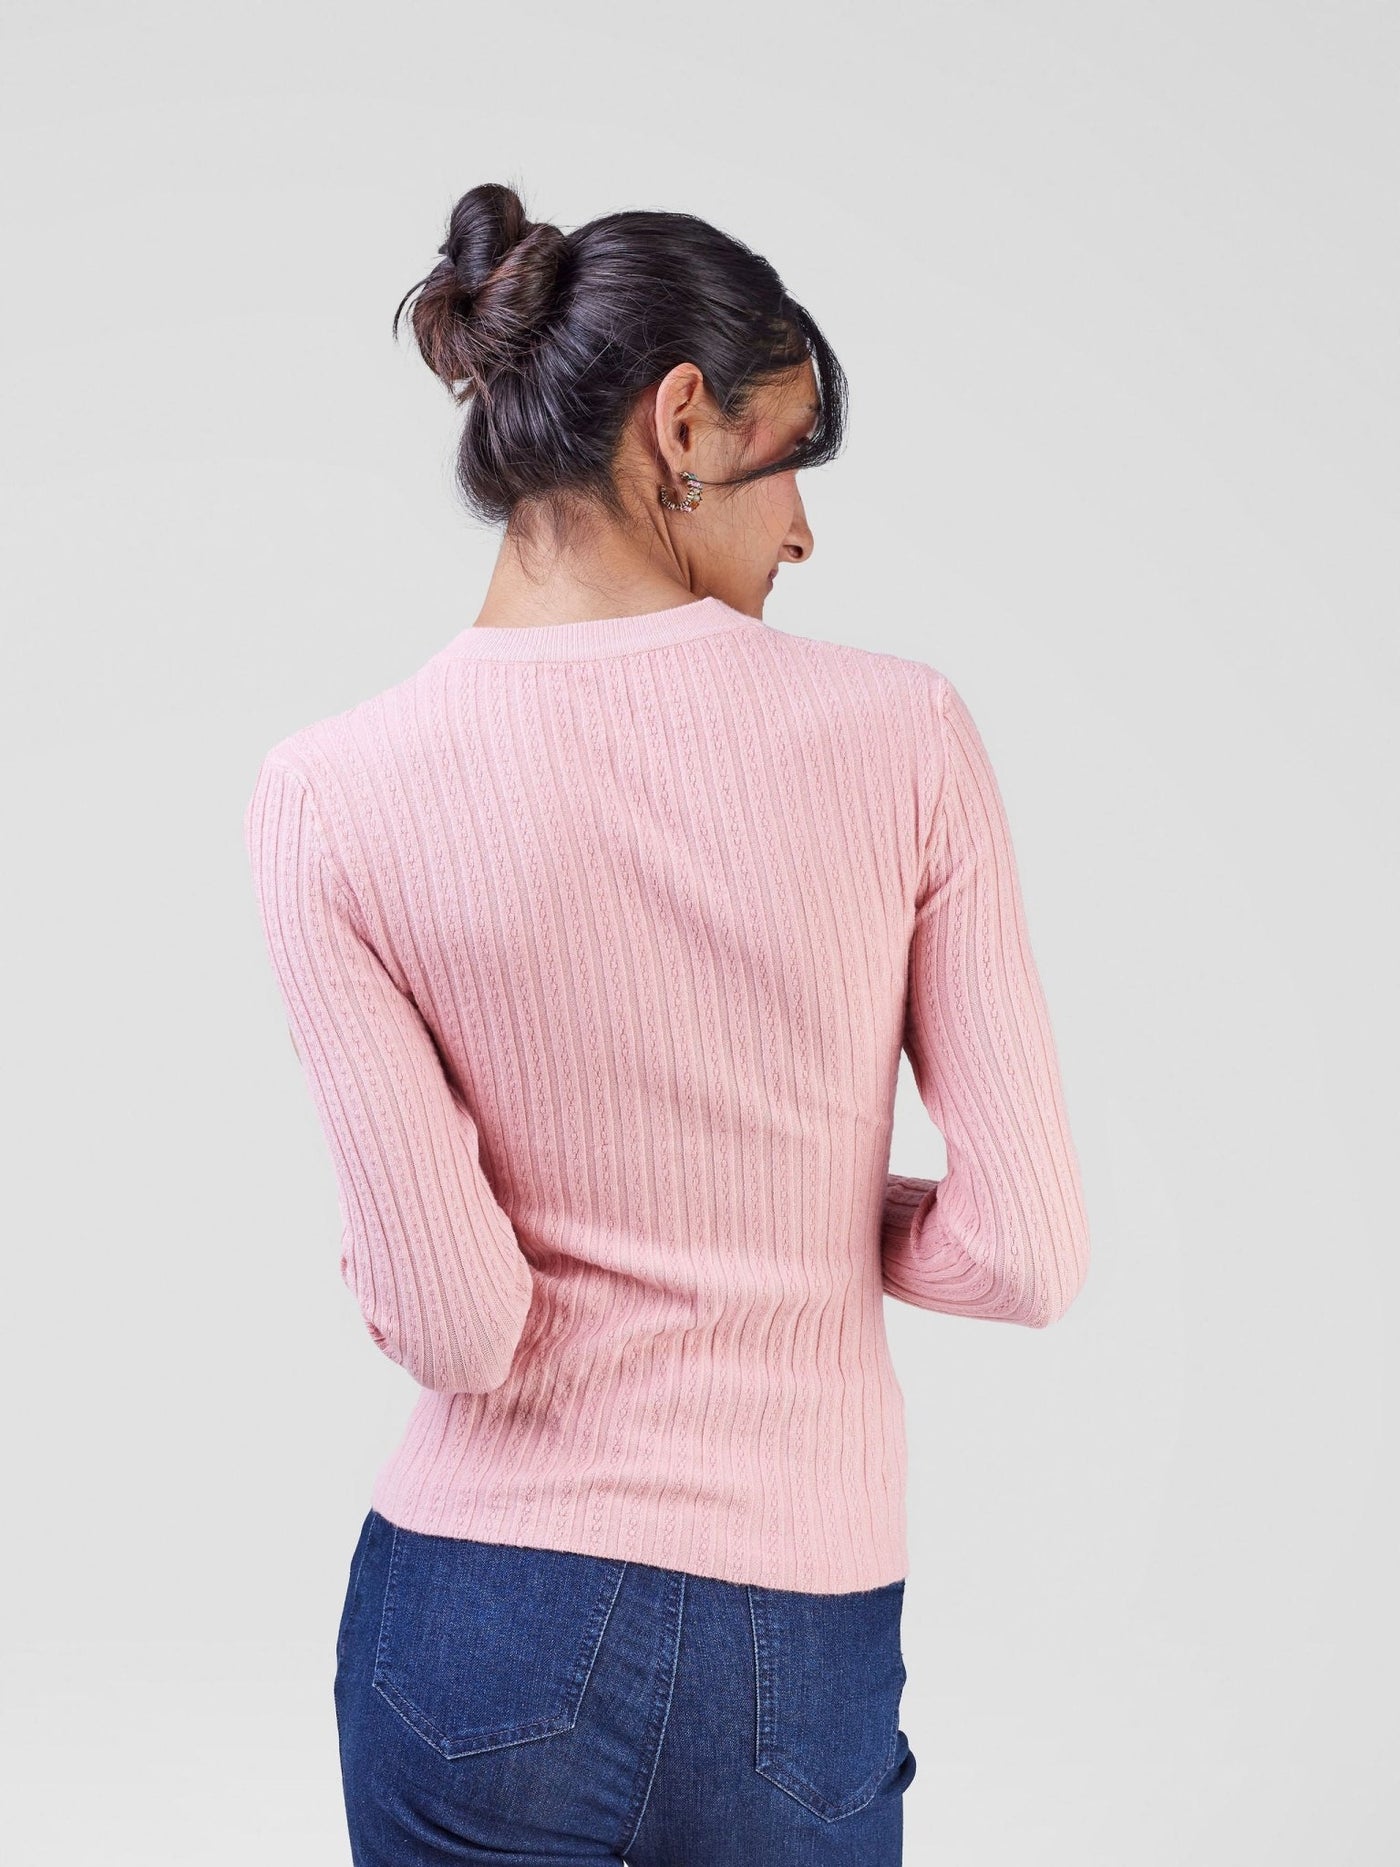 Anika Knitted Sweater With Front Overlap and Neck Design - Pink - Shopzetu